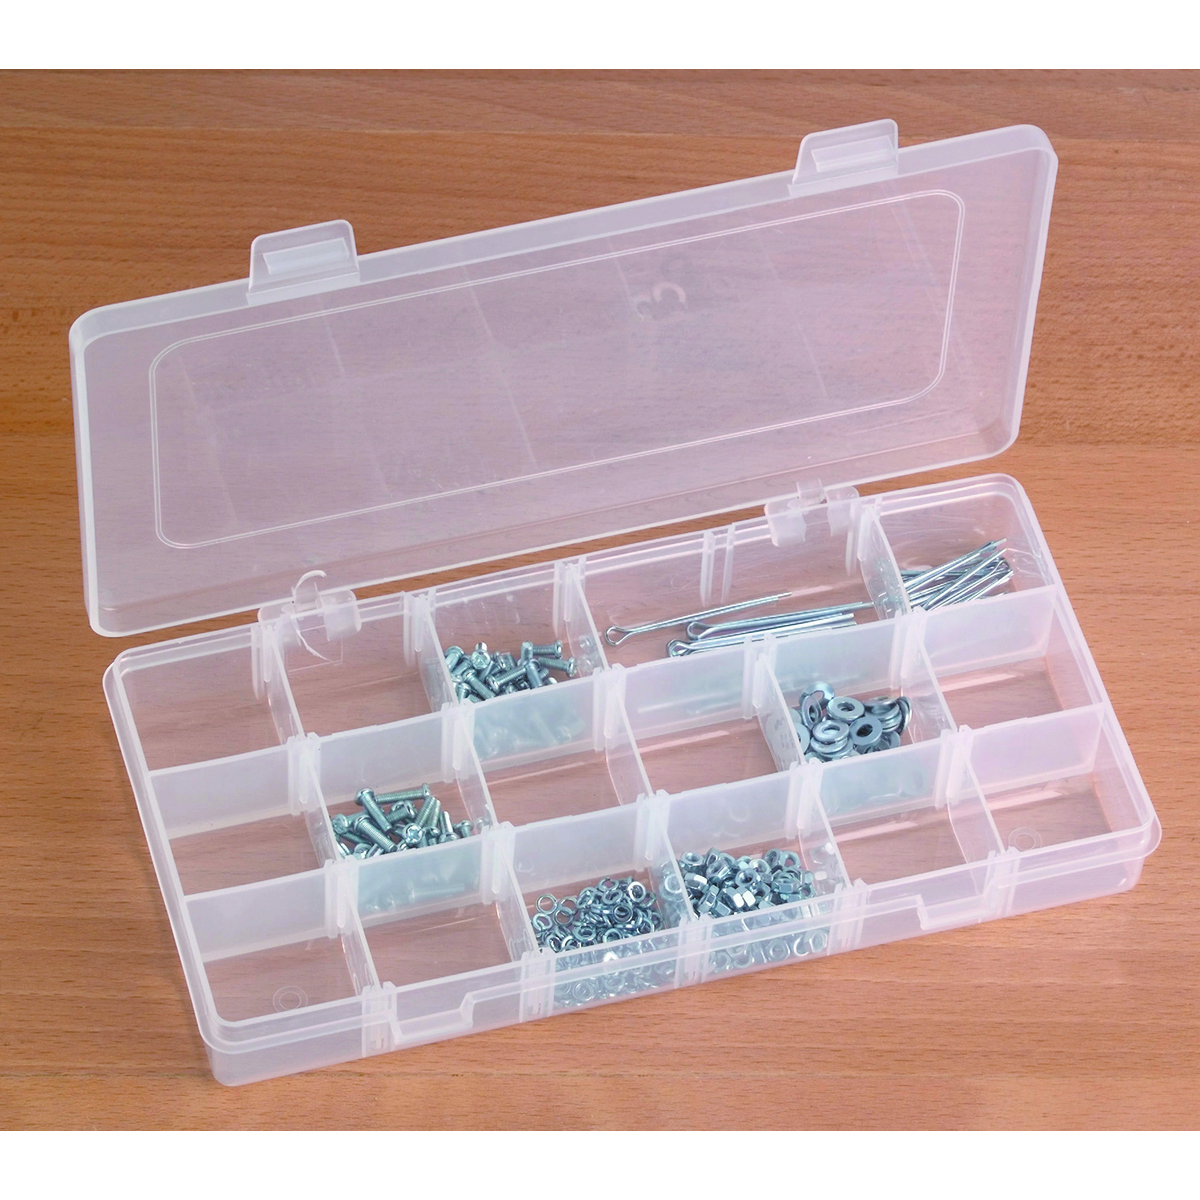 STOREHOUSE 18 Compartment Small Storage Container - Item 94456